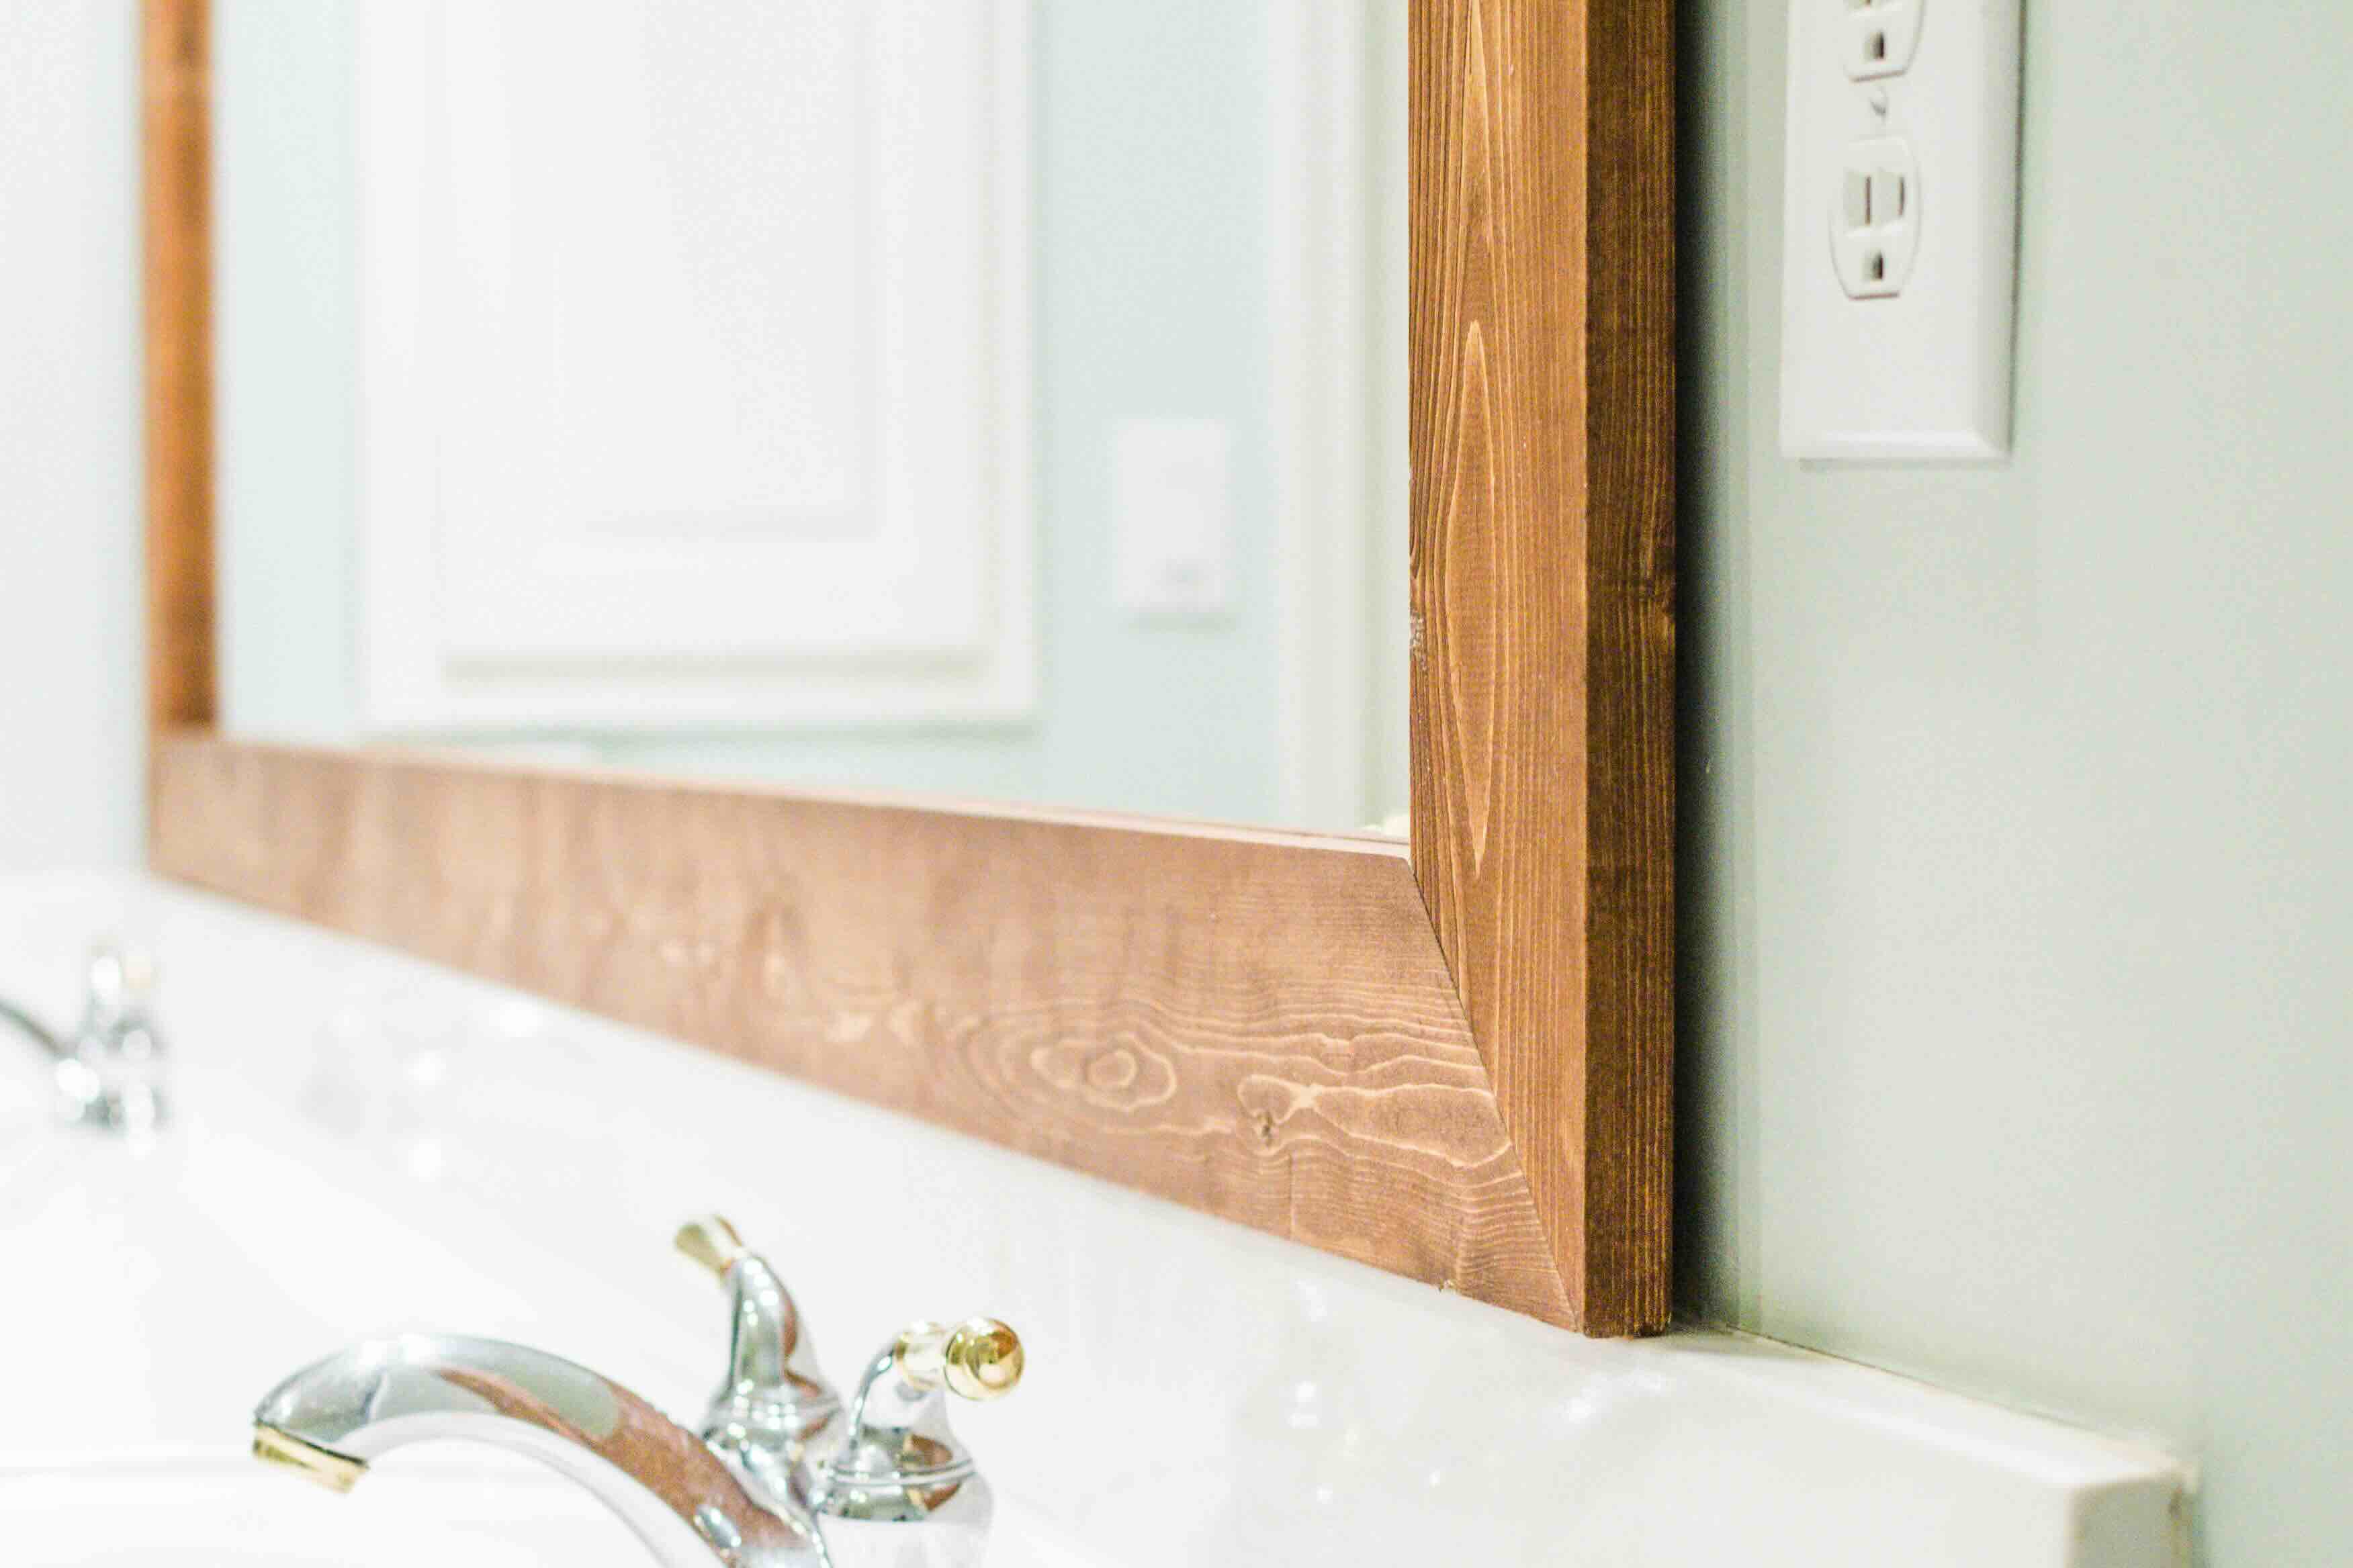 How To Build Framed Bathroom Mirrors